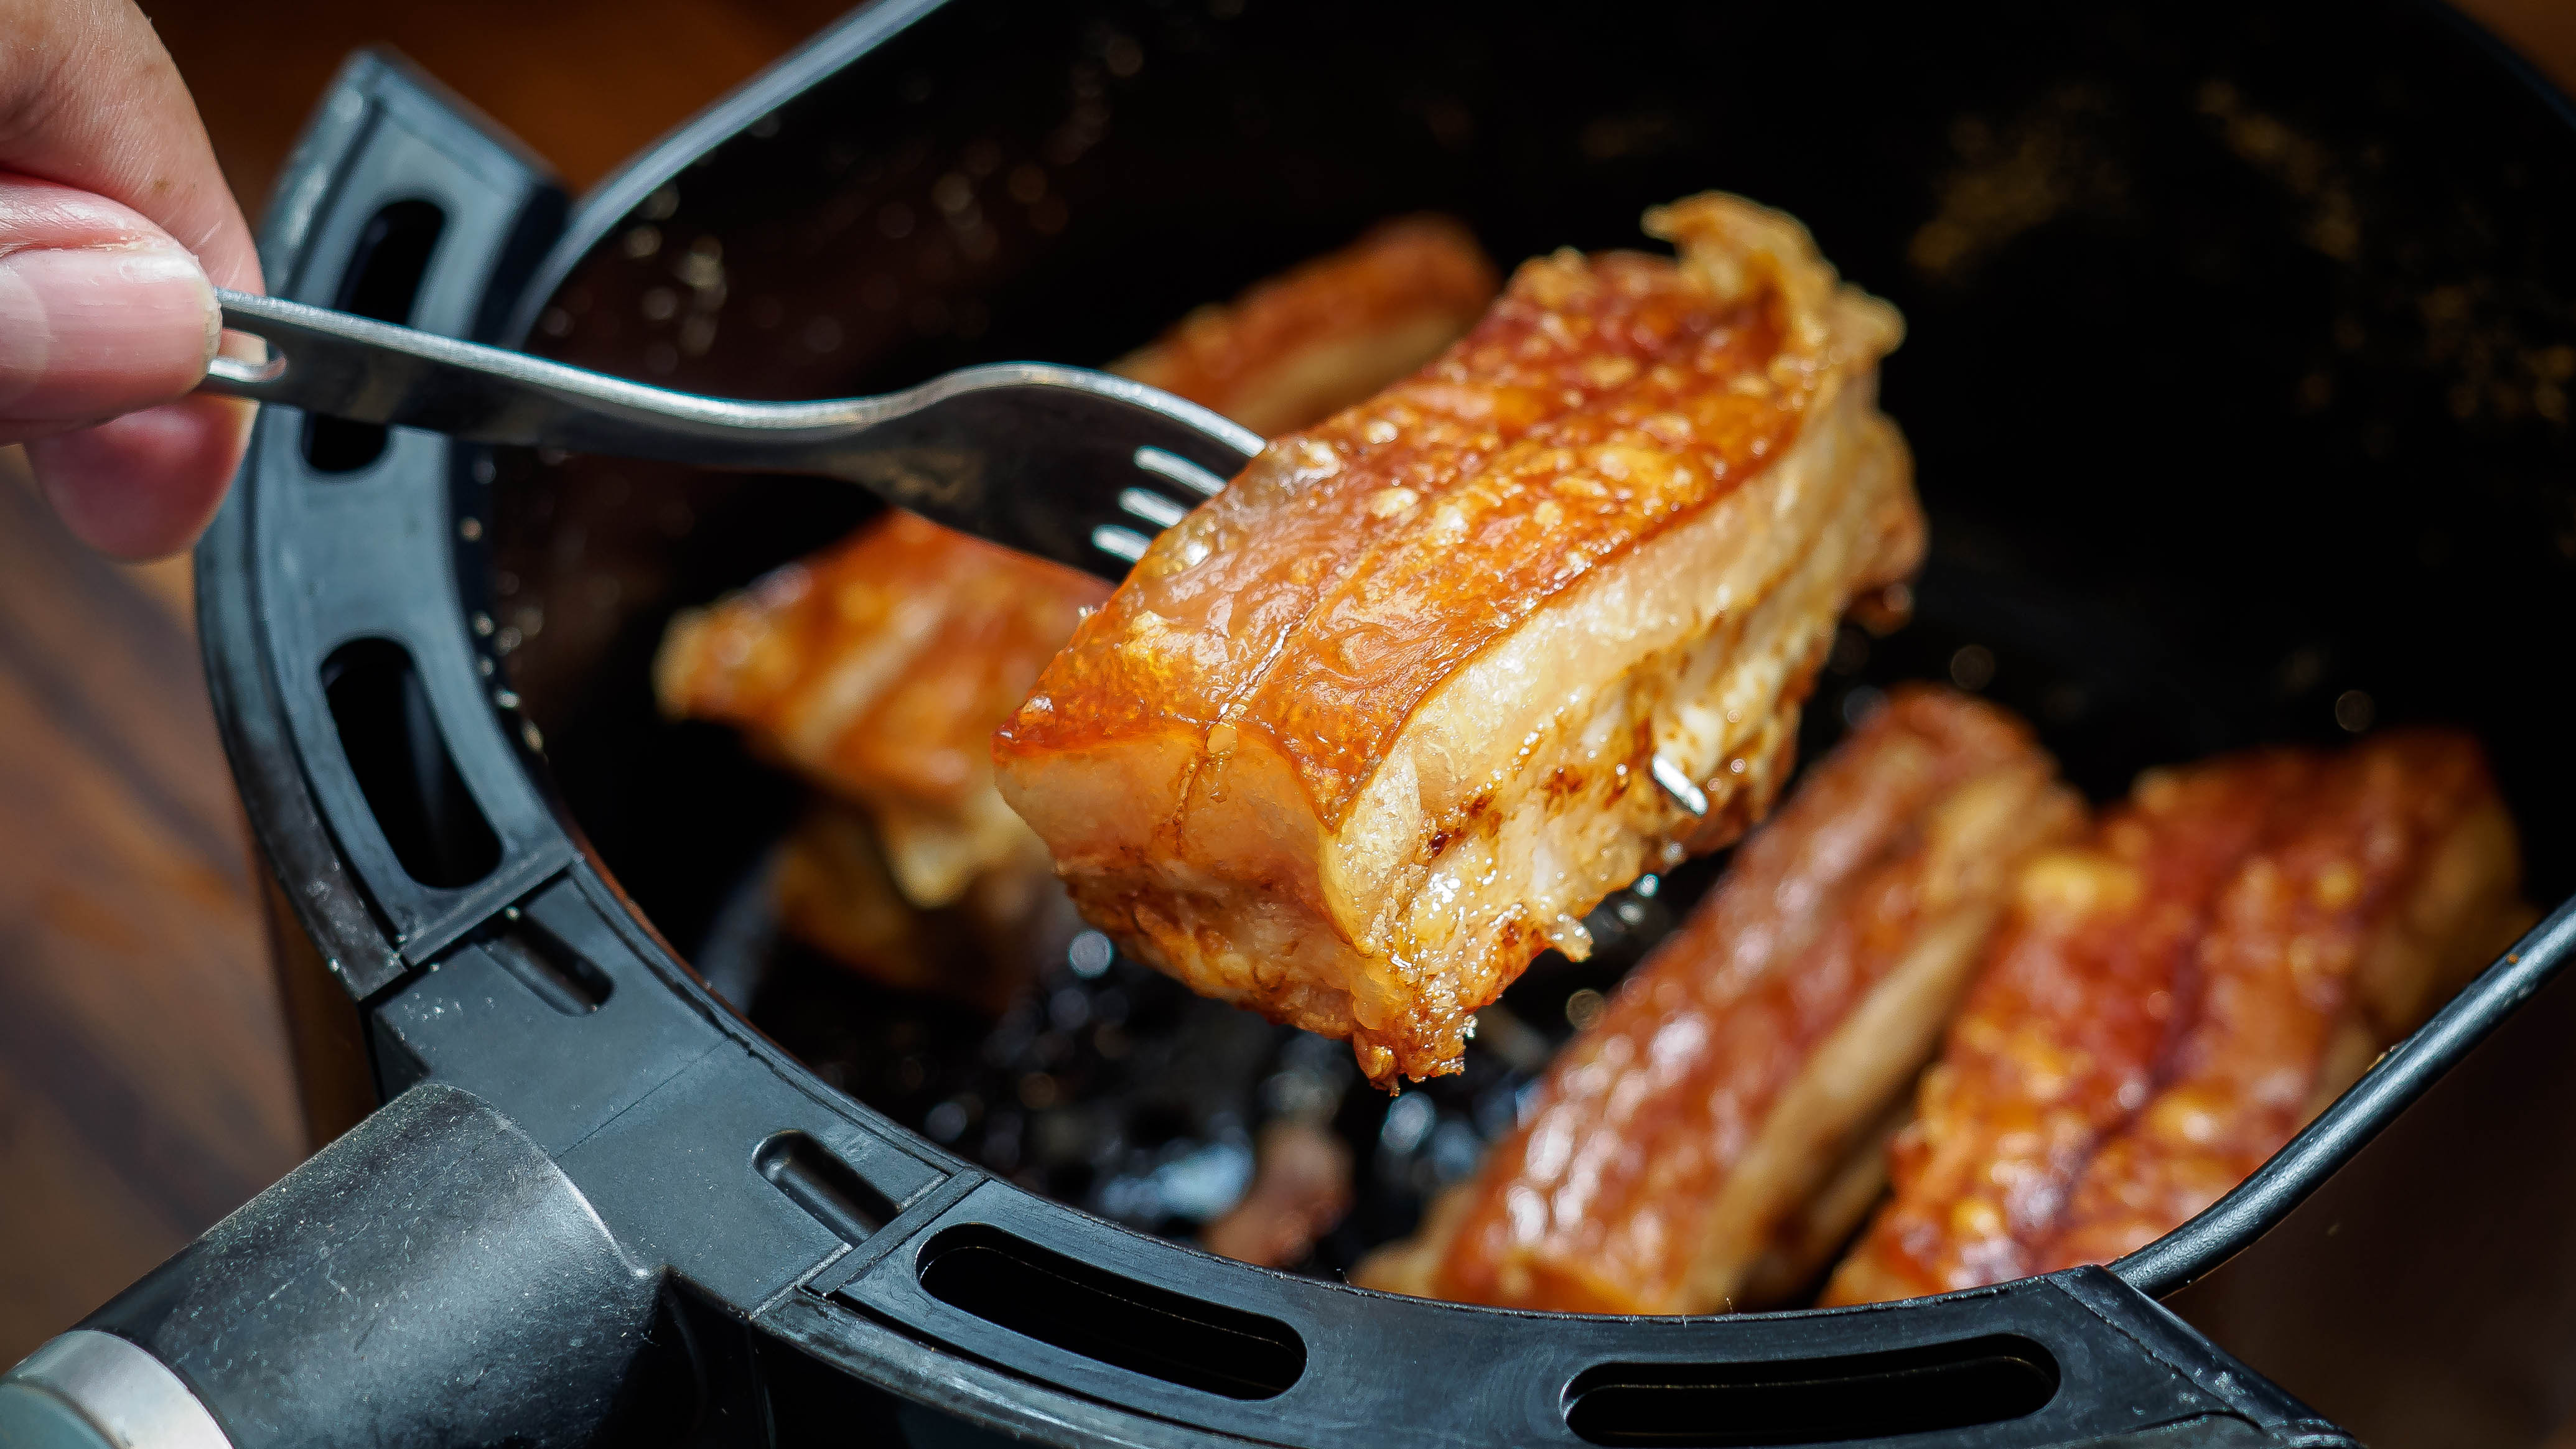 Crispy pork being picked up by a fork in an air fryer